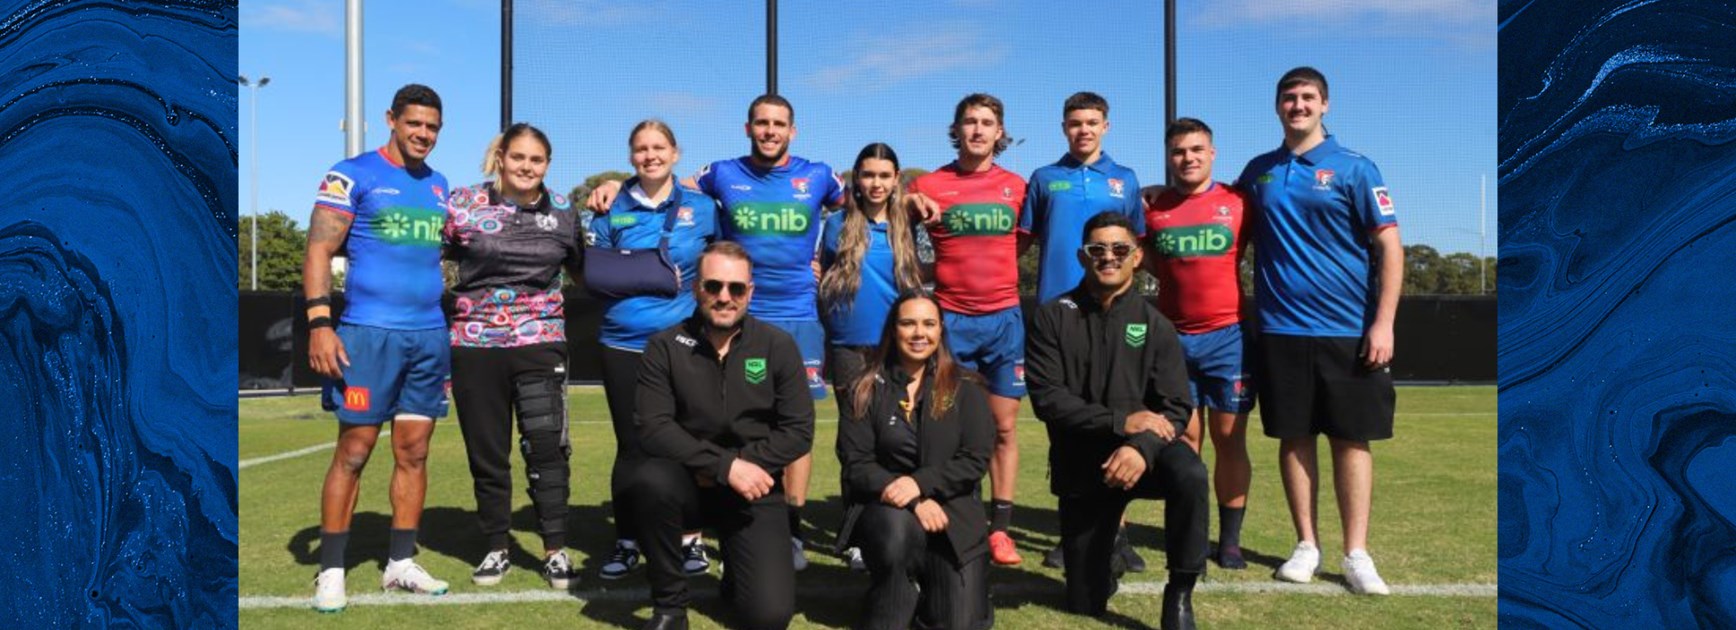 Knights become Youth Ambassadors for three years in a row